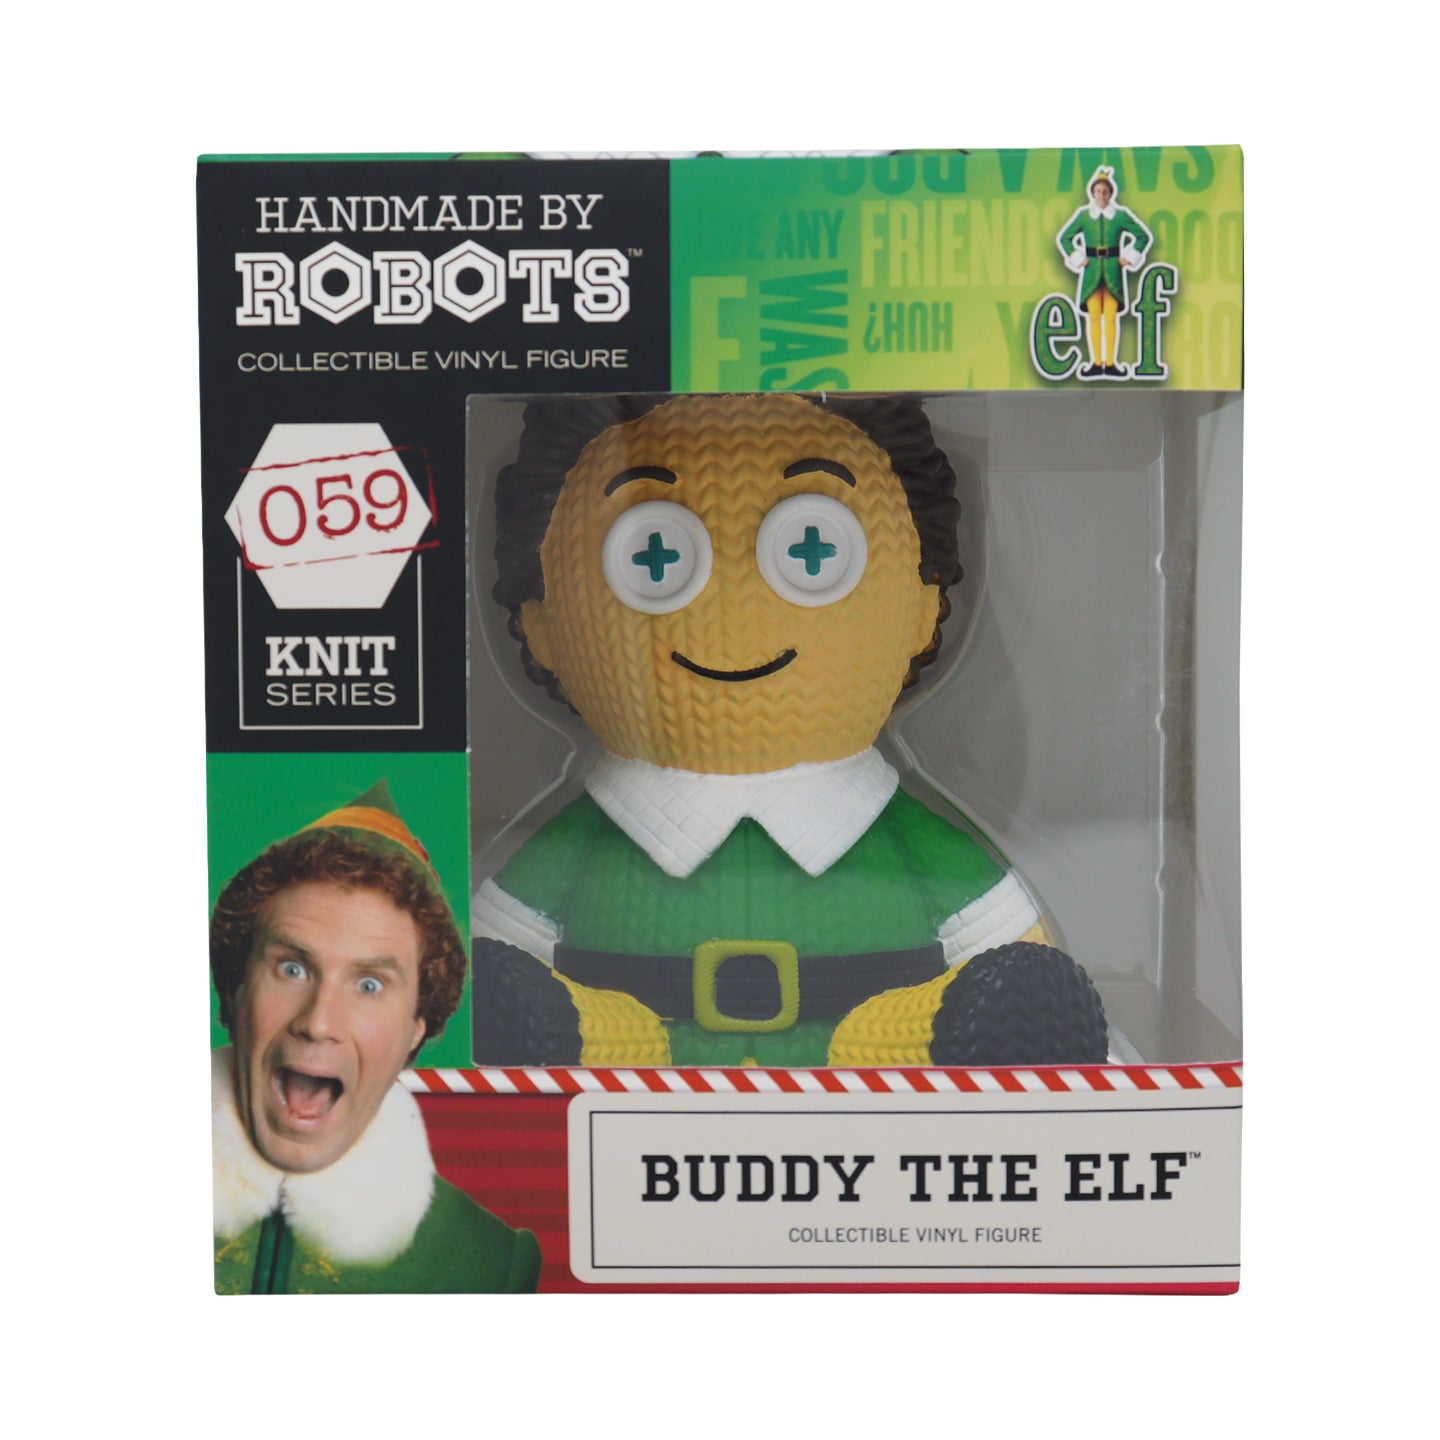 ELF - Buddy Collectible Vinyl Figure from Handmade By Robots